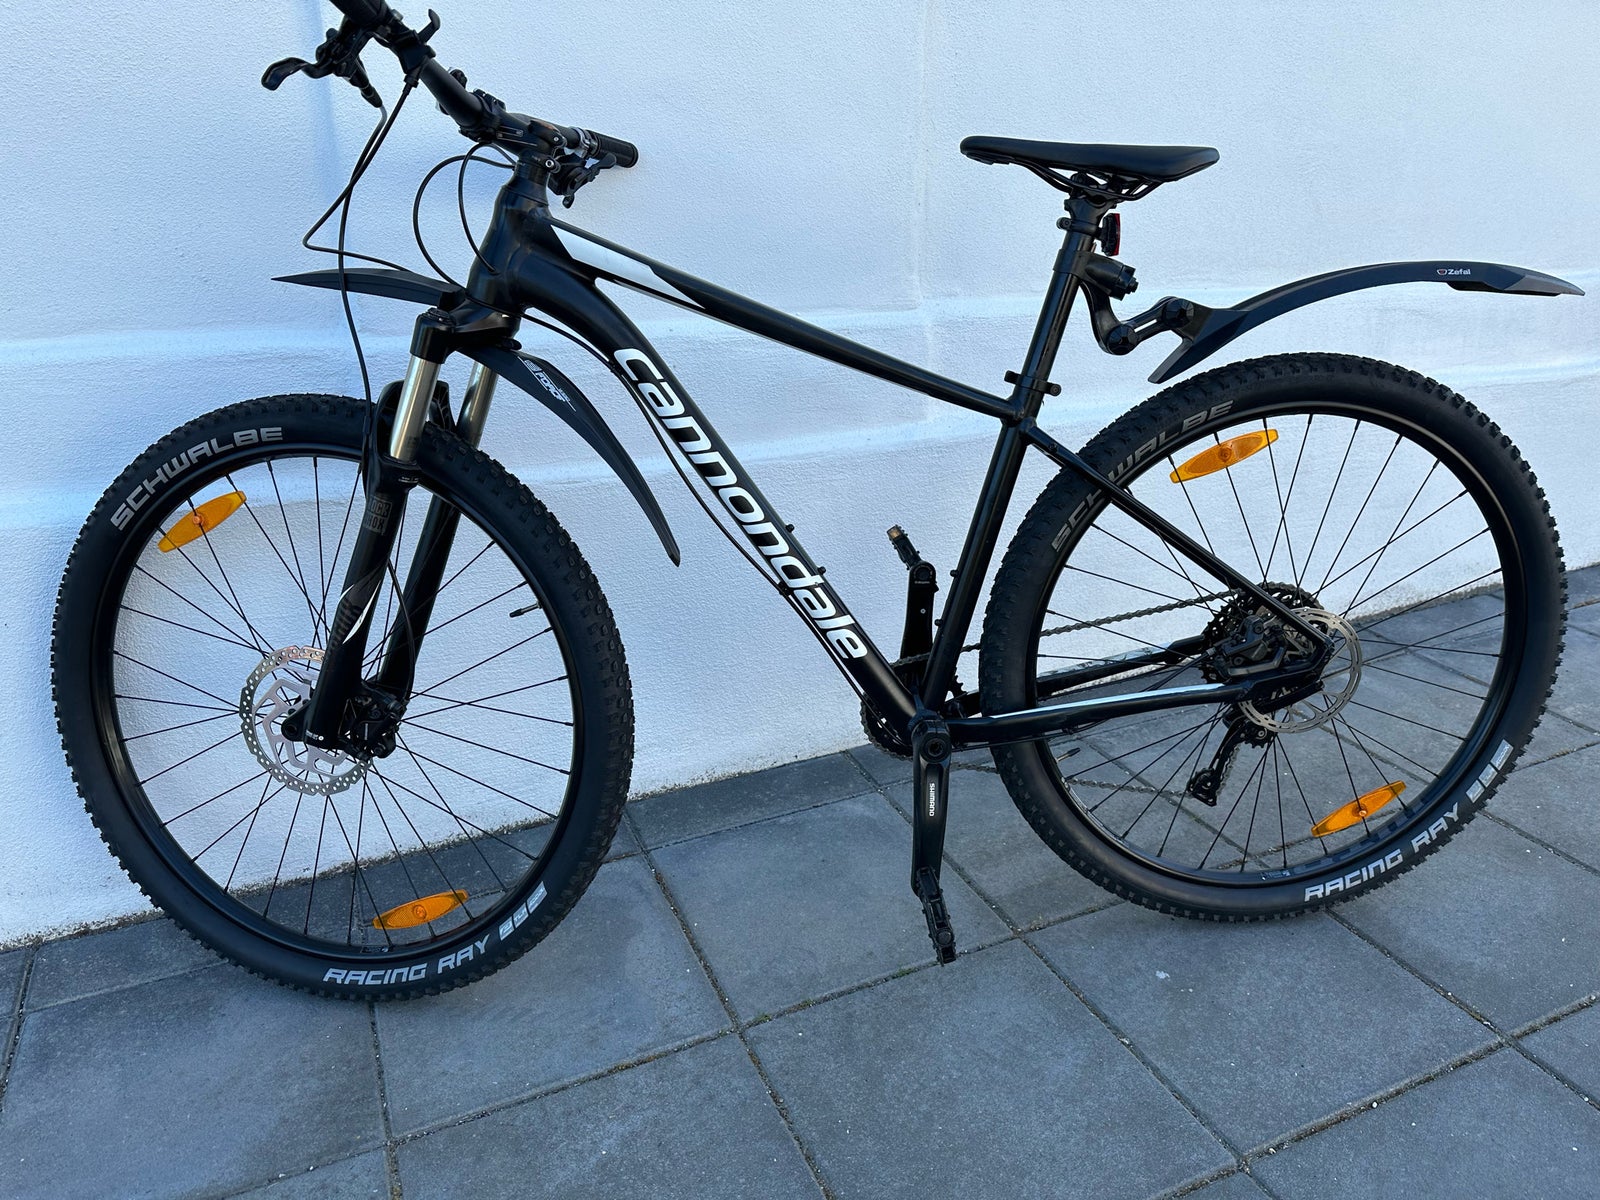 Cannondale Trail 3, hardtail, M tommer